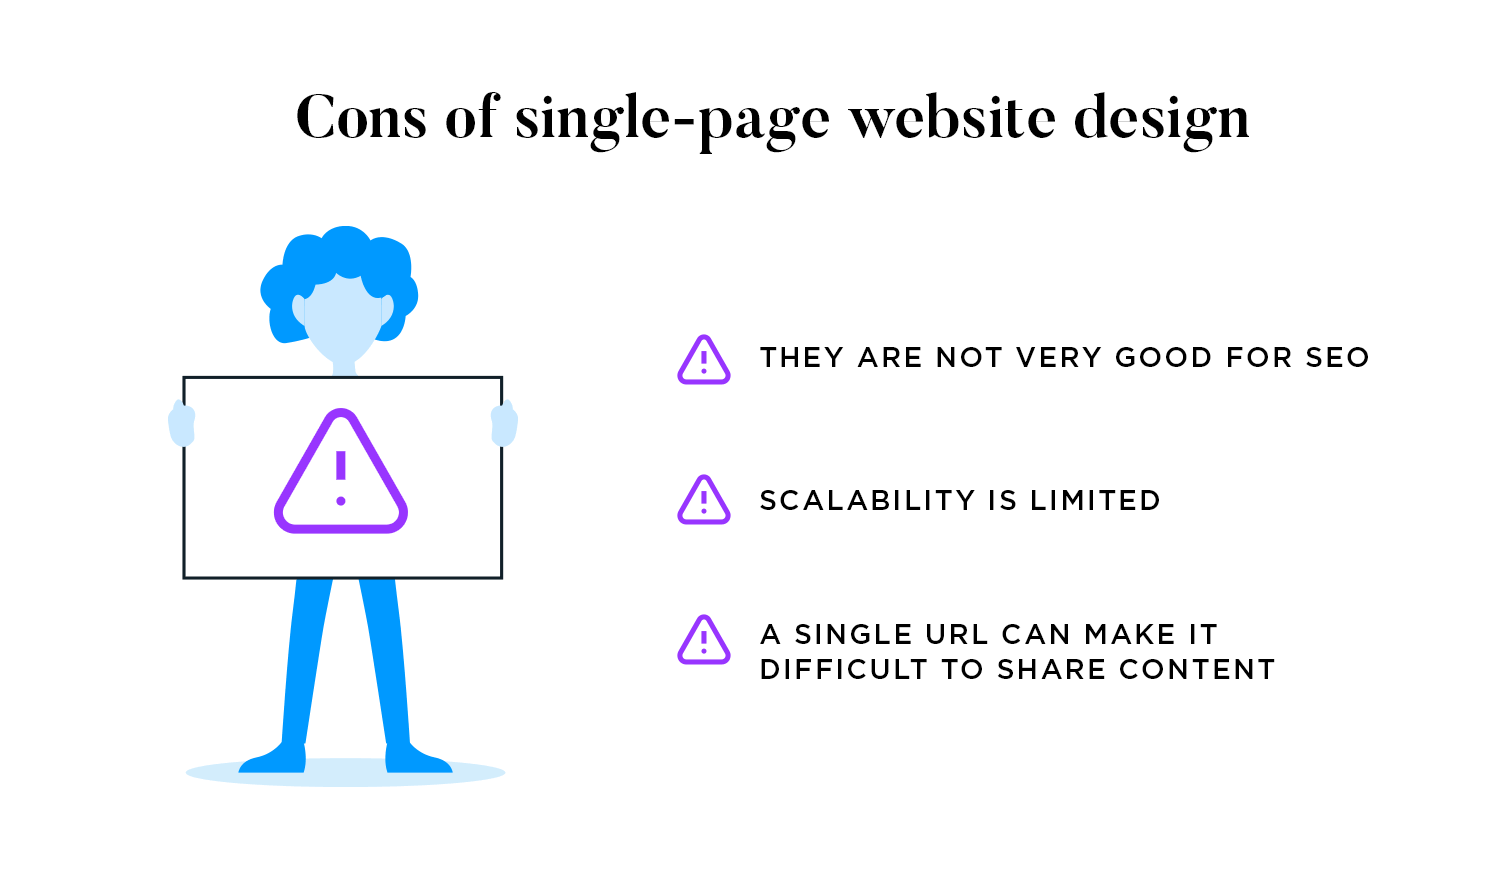 Infographic showing cons of single-page website design